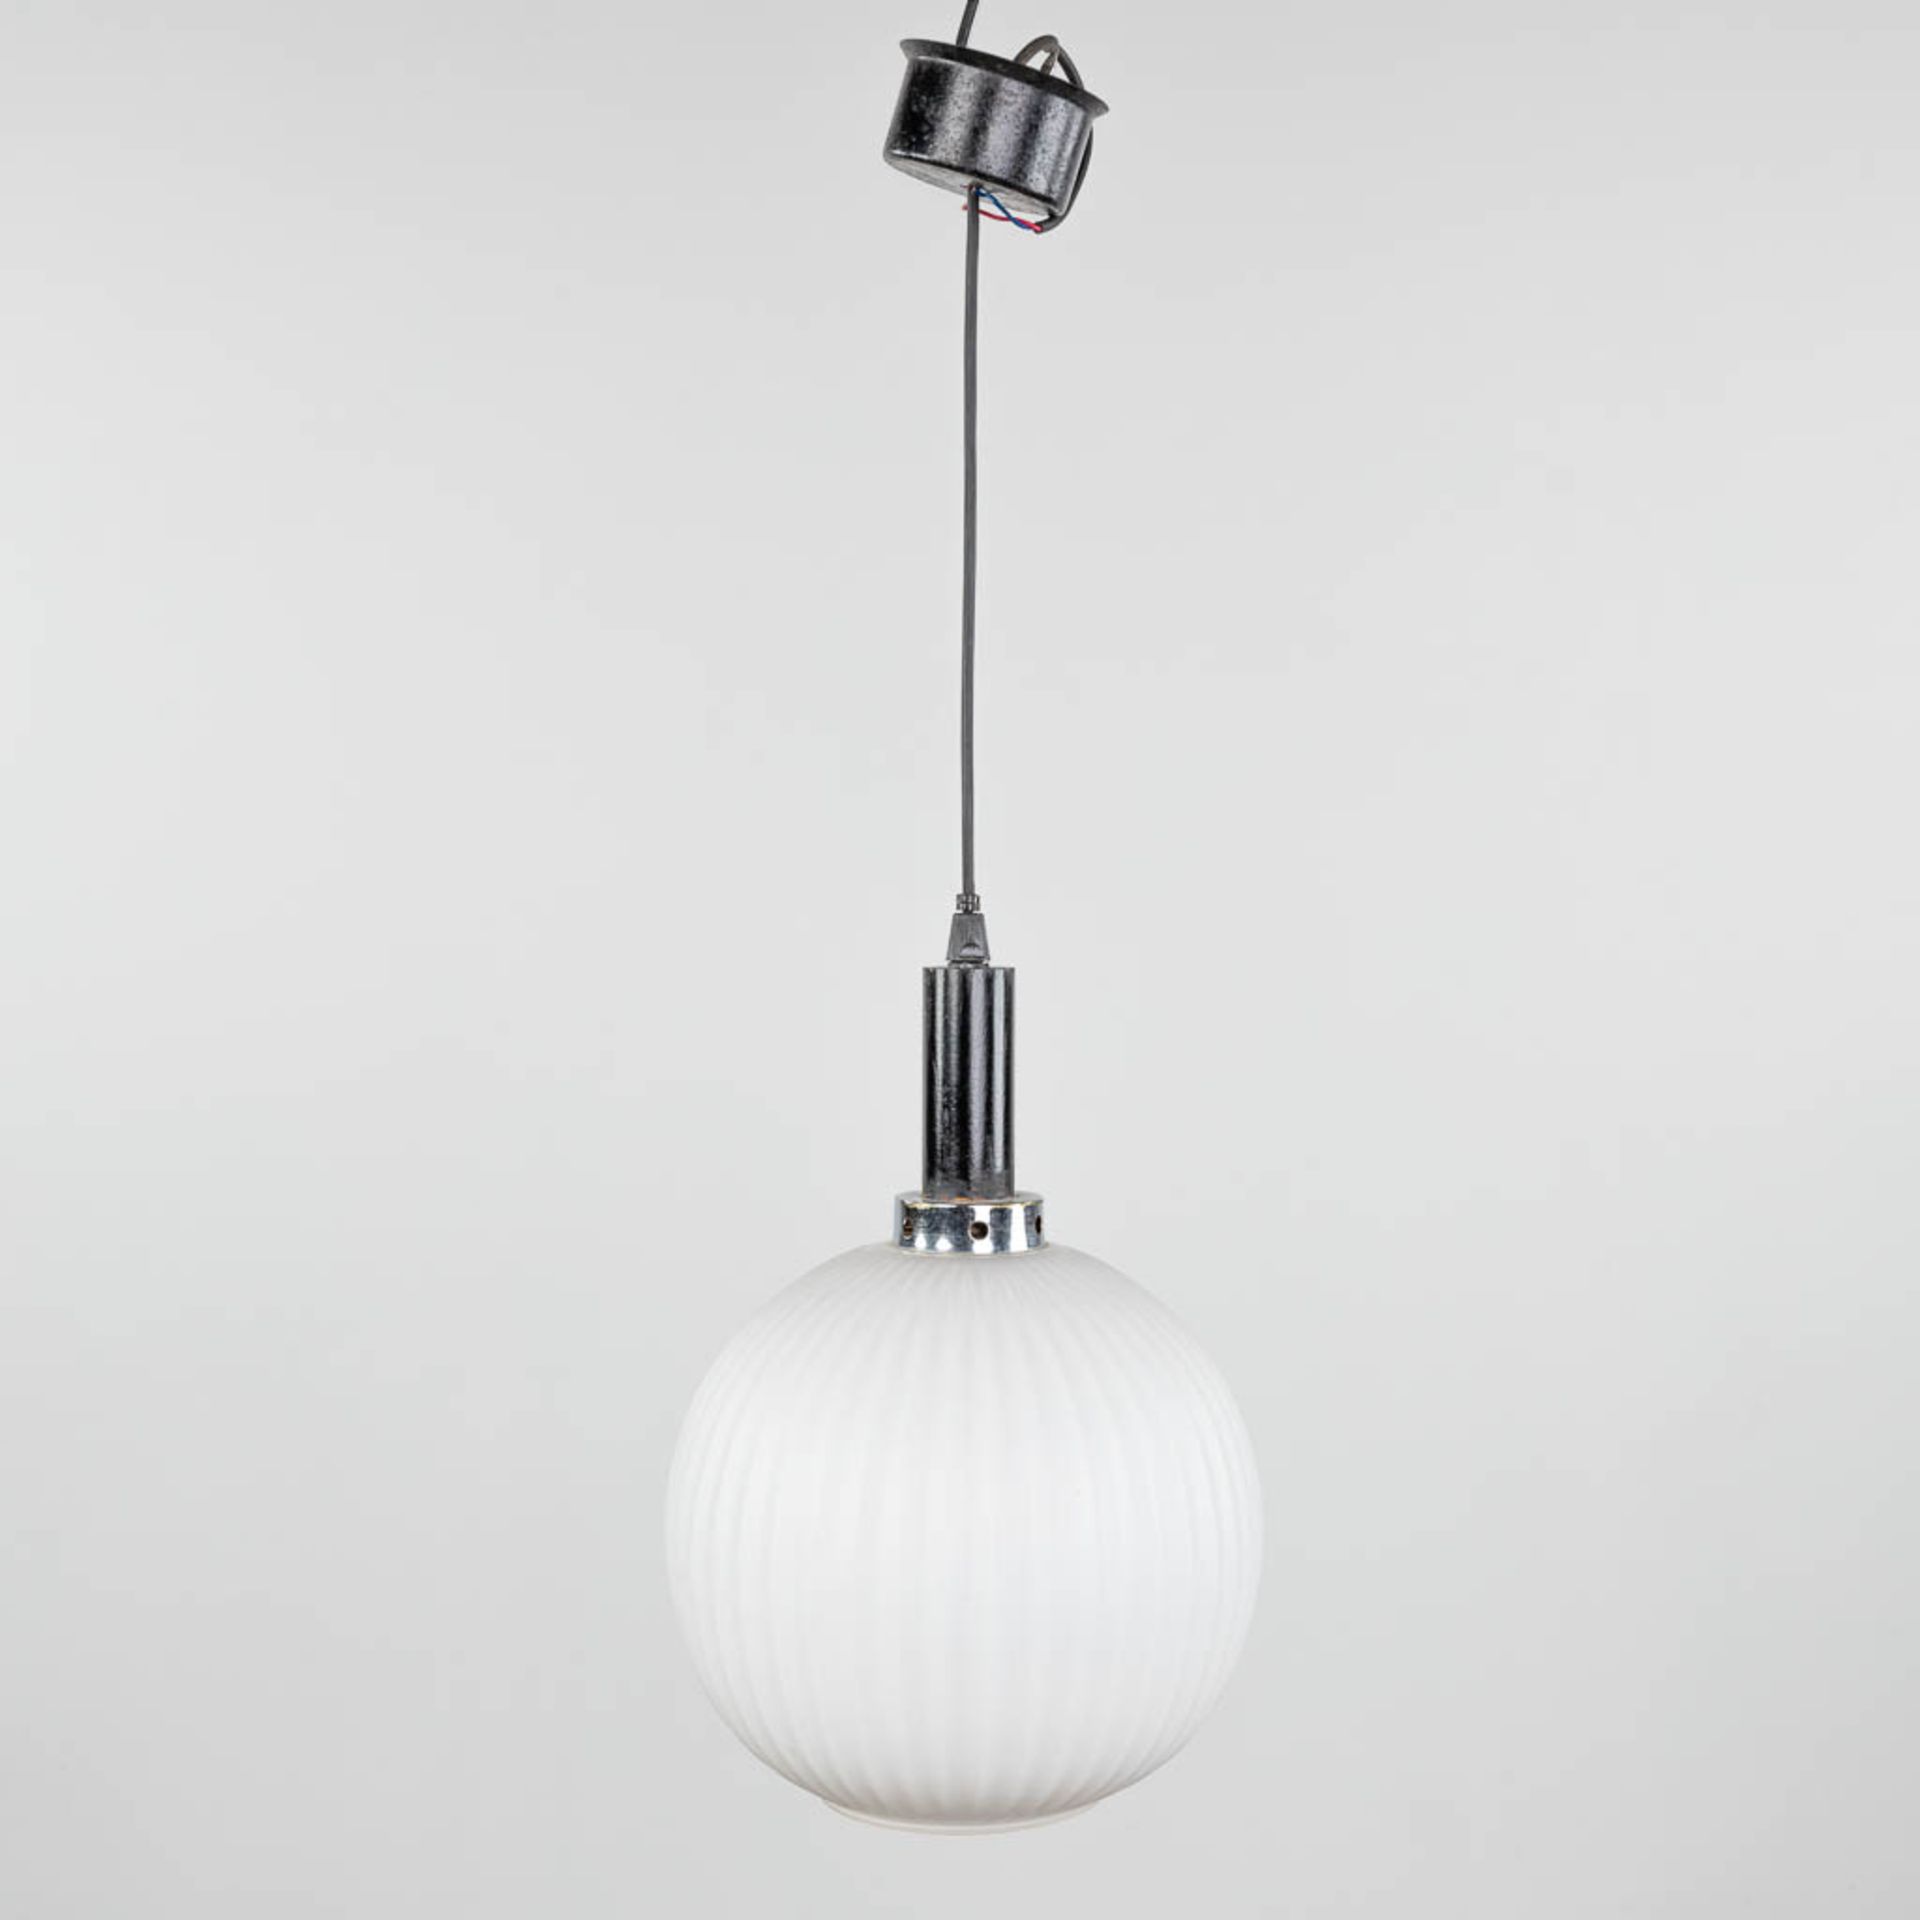 A suspension lamp, opaline glass and chromed metal. (H:40 x D:24 cm)